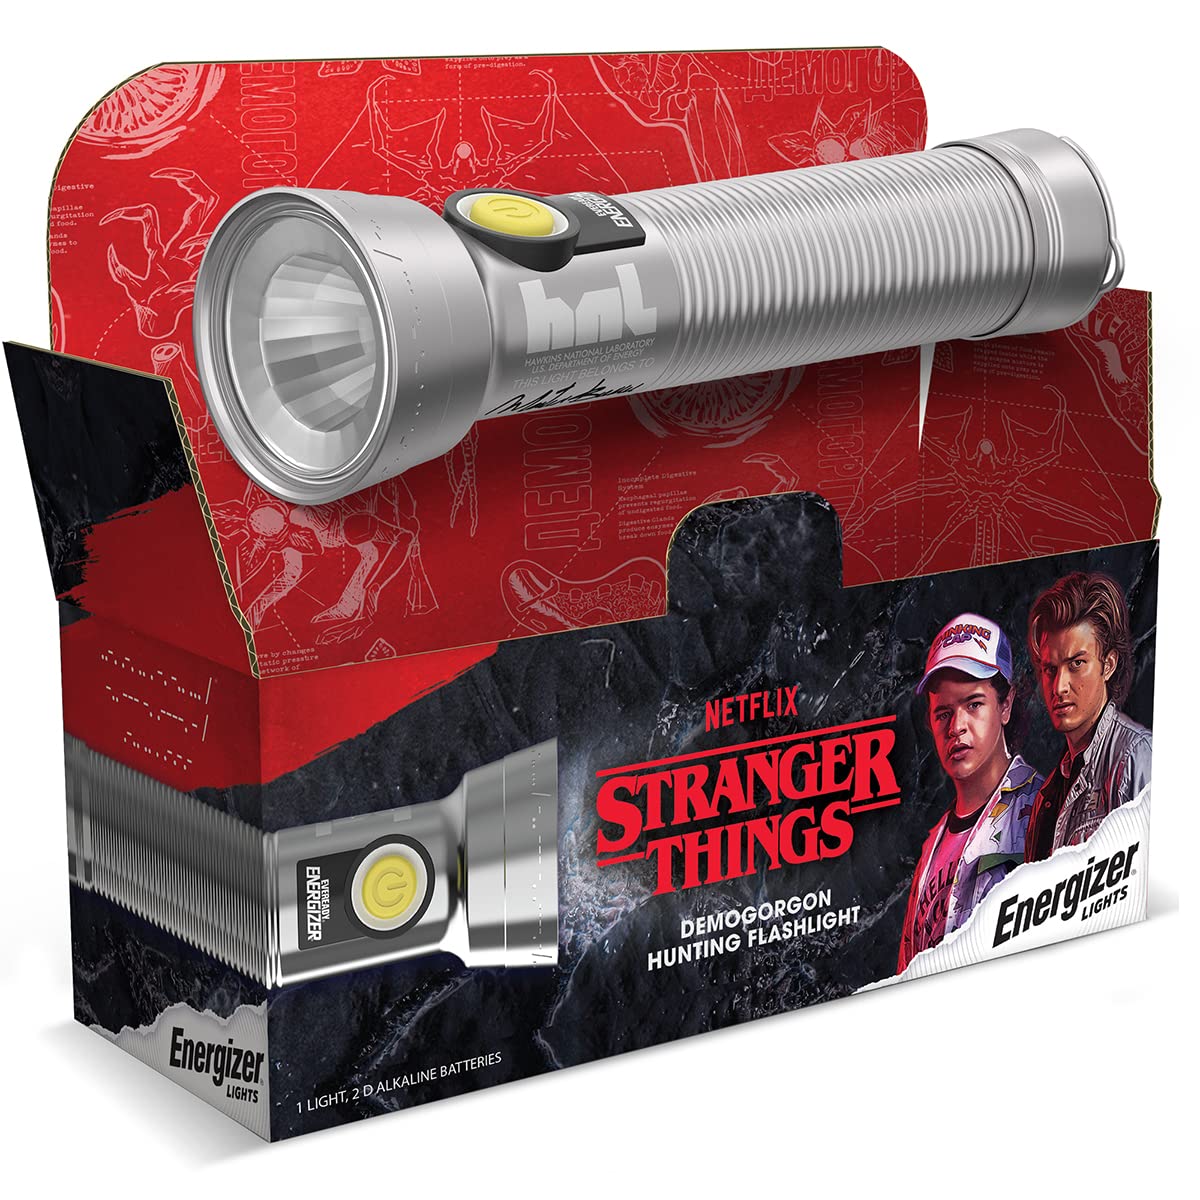 Stranger Things Energizer Demogorgon Hunting LED vintage Style Flashlight (Collector's Edition) $10.19 + Free Shipping w/ Prime or on $25+